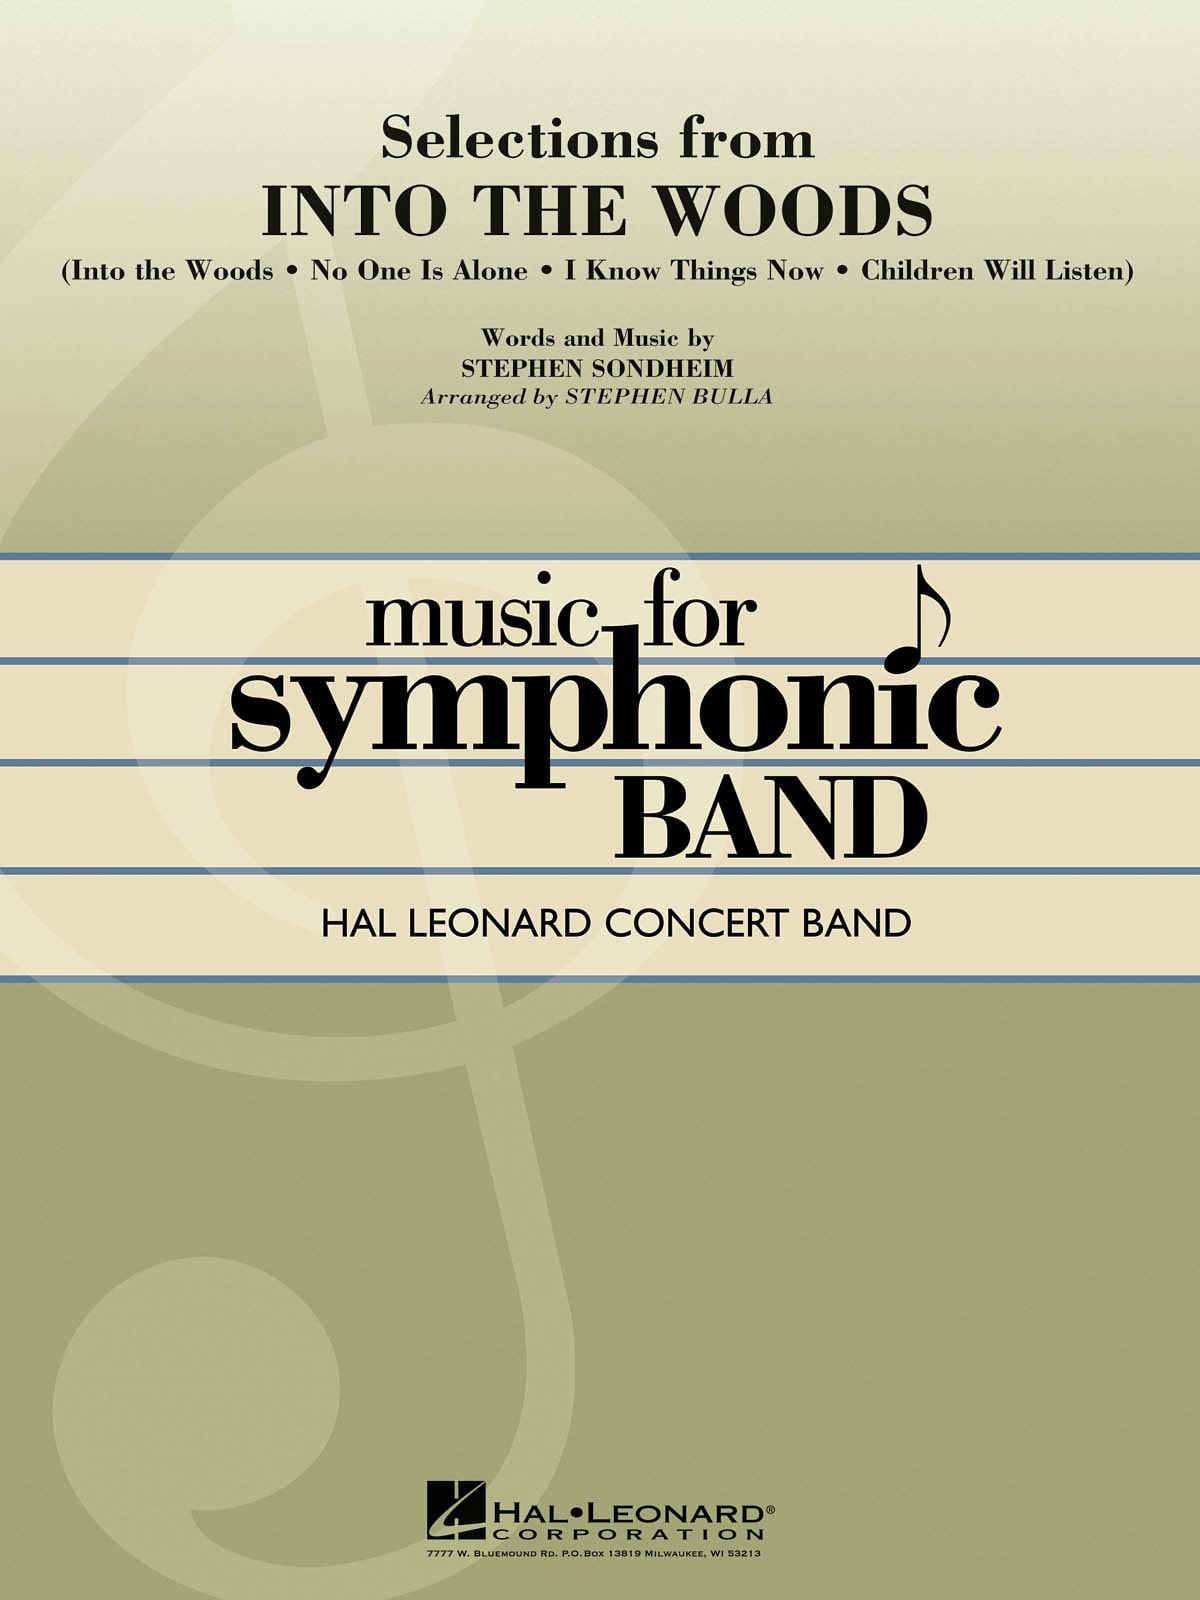 Selections from Into the Woods for Concert Band/Harmonie published by Hal Leonard - Set (Score & Parts)